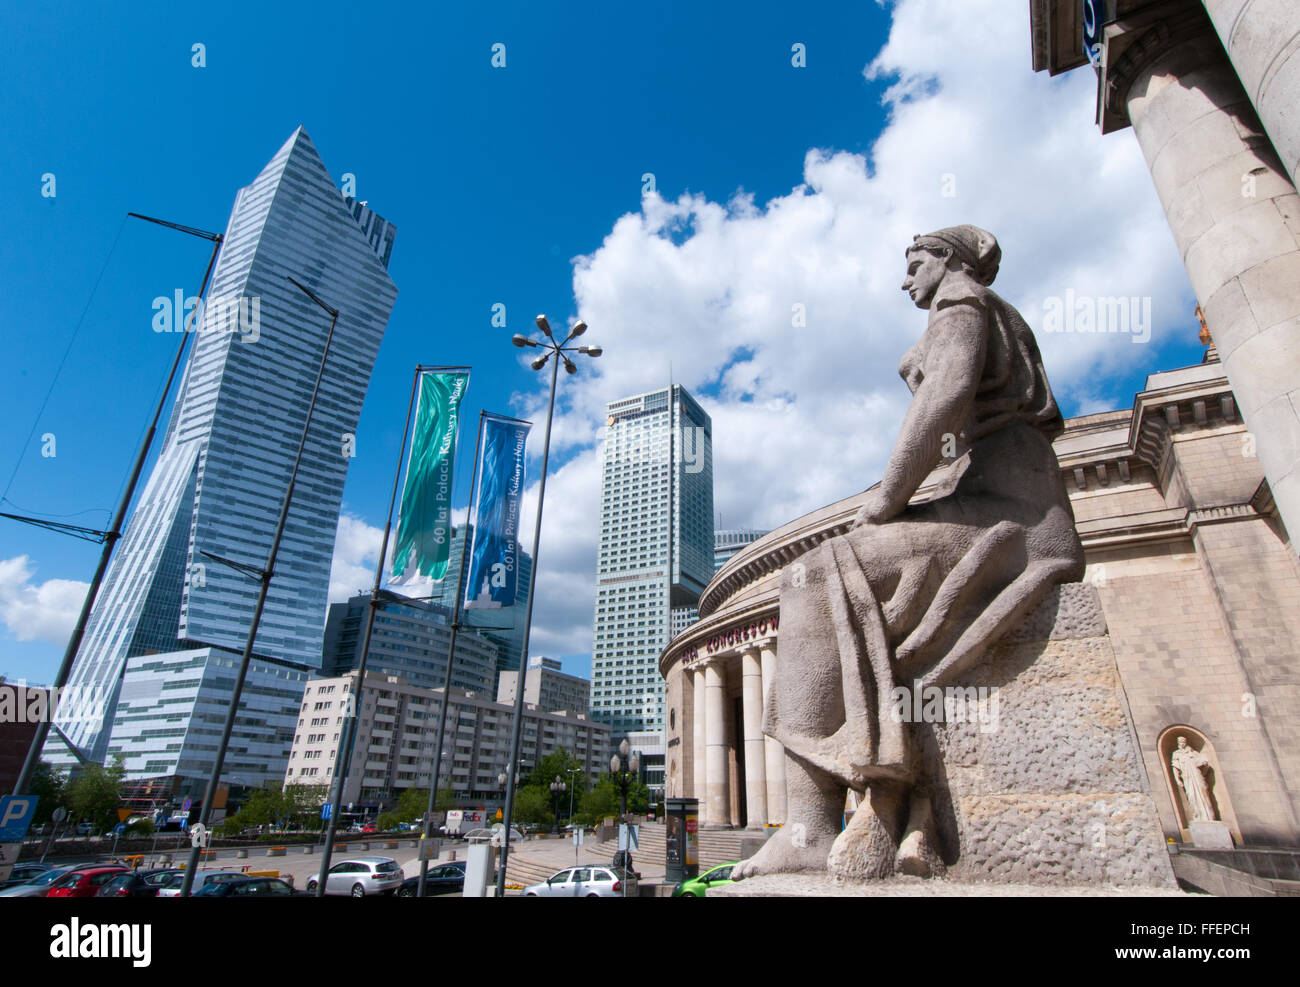 Monumental sculpture outside Palace of Culture and Science overlooking modern high-rise office buildings in Warsaw city centre Stock Photo